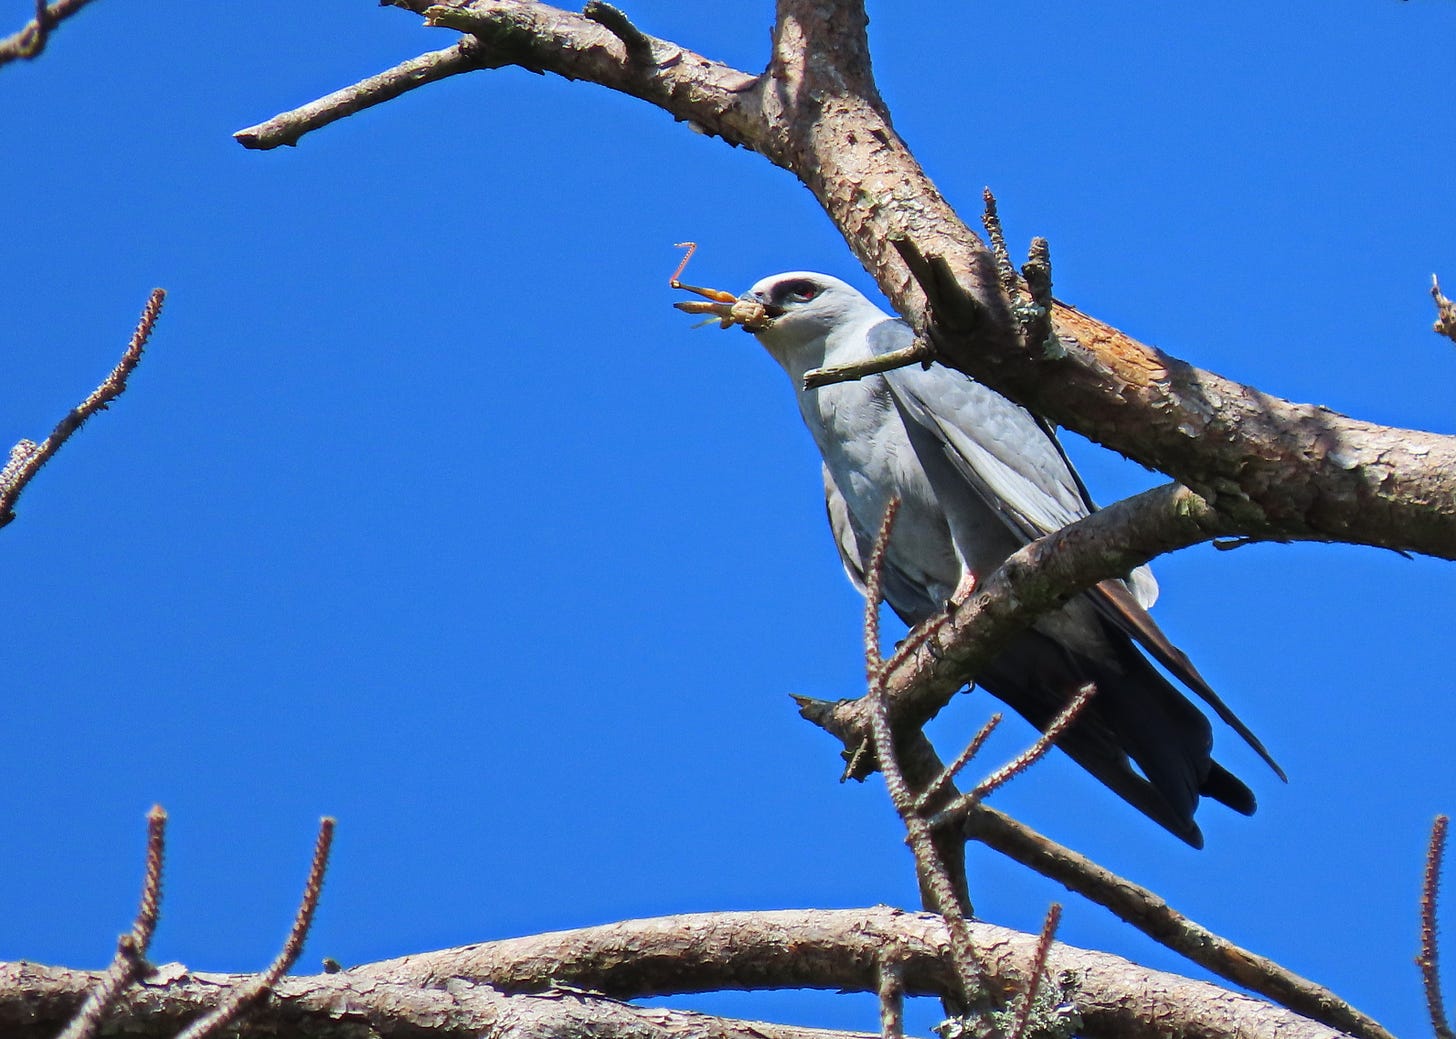 A gray raptor against a blue sky with an insect in its beak